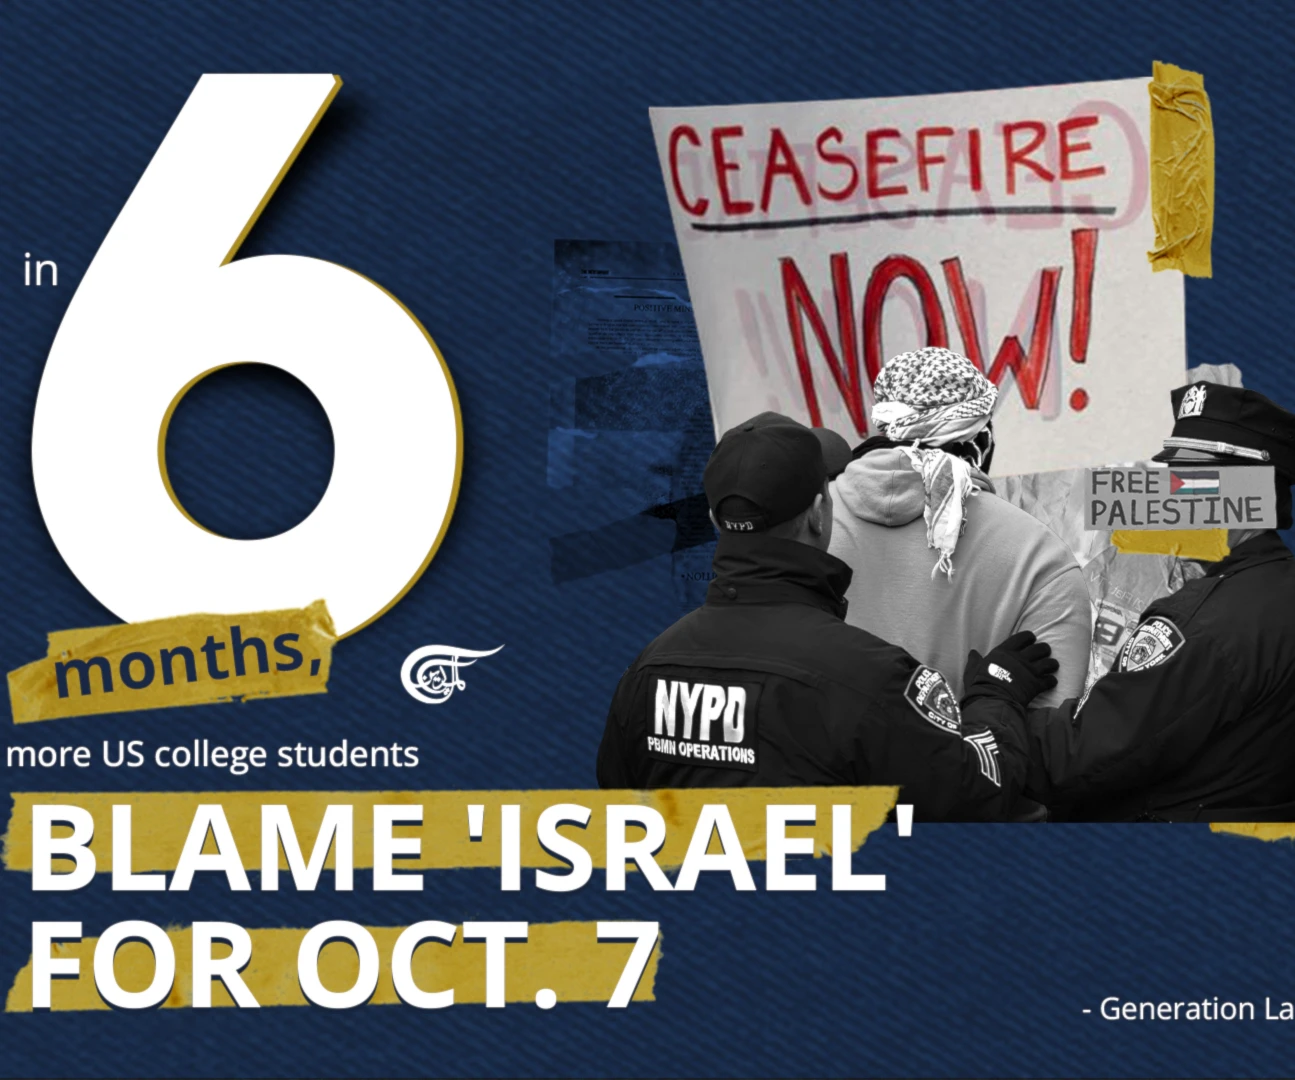 In 6 months, more US college students blame 'Israel' for Oct. 7